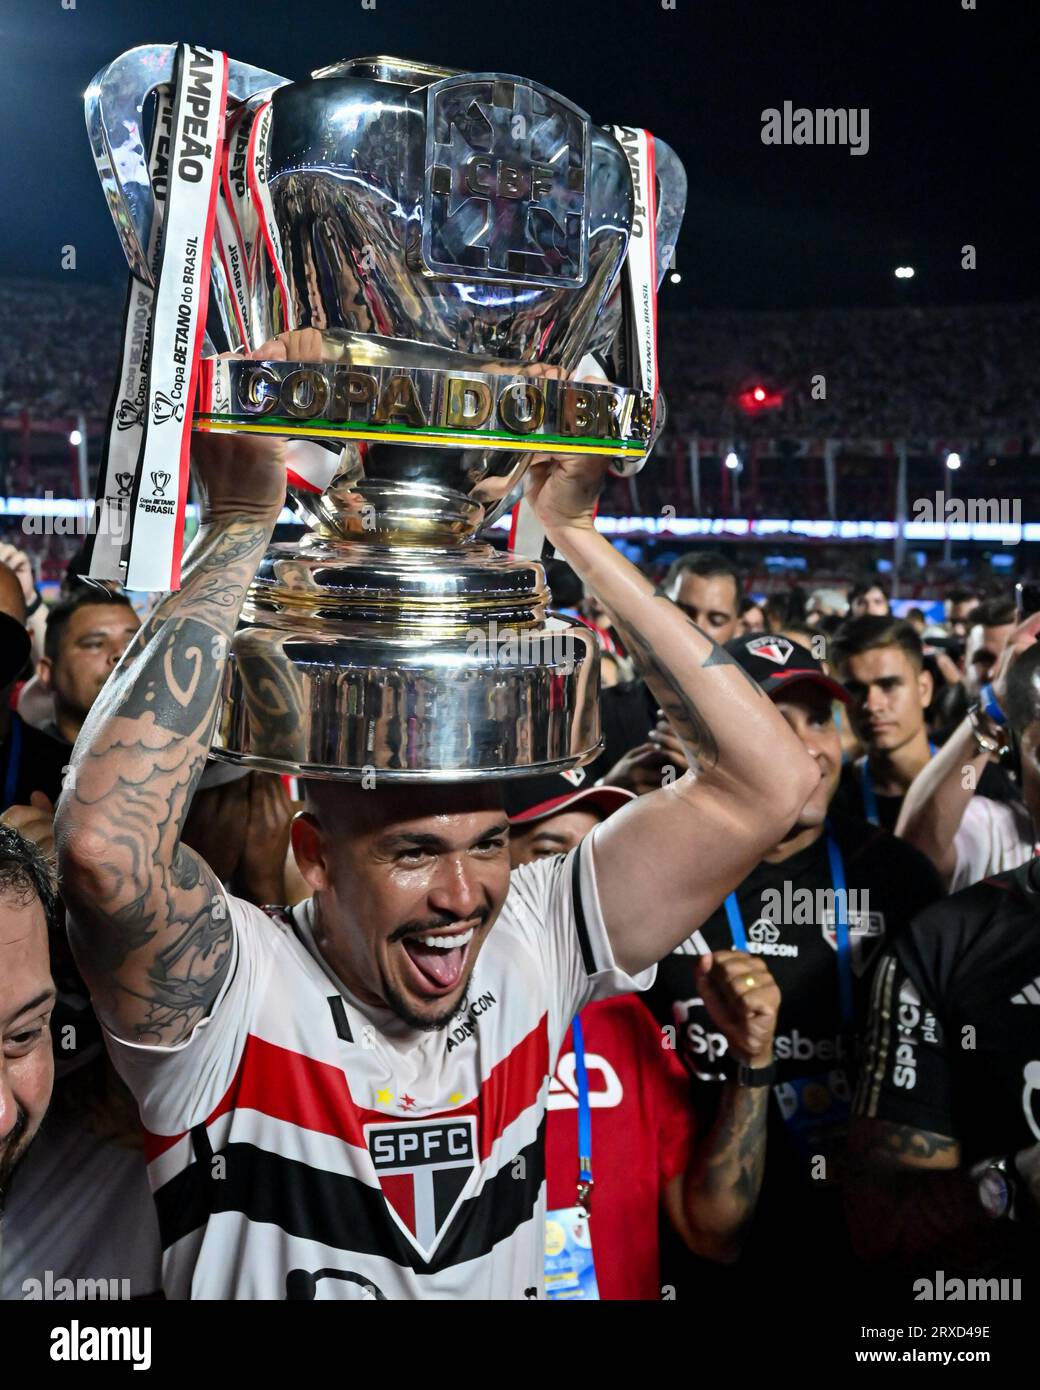 Sao Paulo, Brazil. 24th Sep, 2023. Luciano of Sao Paulo celebrate the title of champion after the match between Sao Paulo and Flamengo, for the second leg of Final Brazil Cup 2023, at Morumbi Stadium, in Sao Paulo on September 24. Photo: Gledston Tavares/DiaEsportivo/Alamy Live News Credit: DiaEsportivo/Alamy Live News Stock Photo